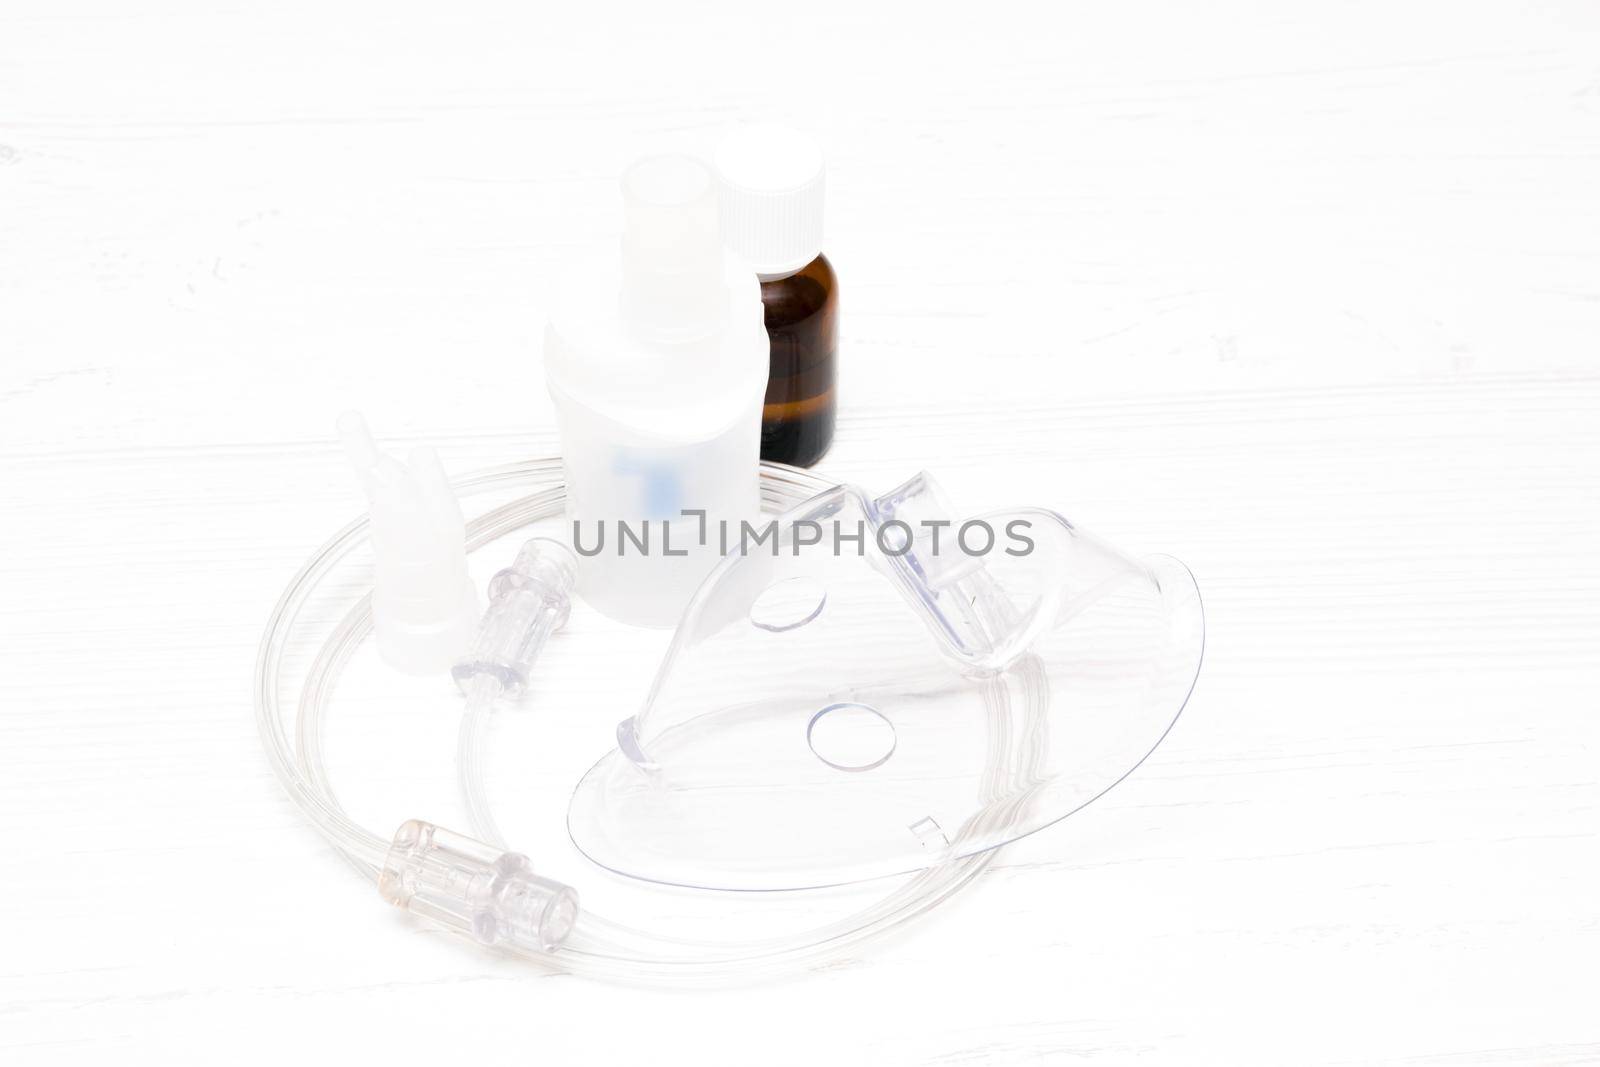 nhaler, tube and mask on a light background, copy space, medicine in a dark bottle for inhalation, respiratory diseases concept by natashko